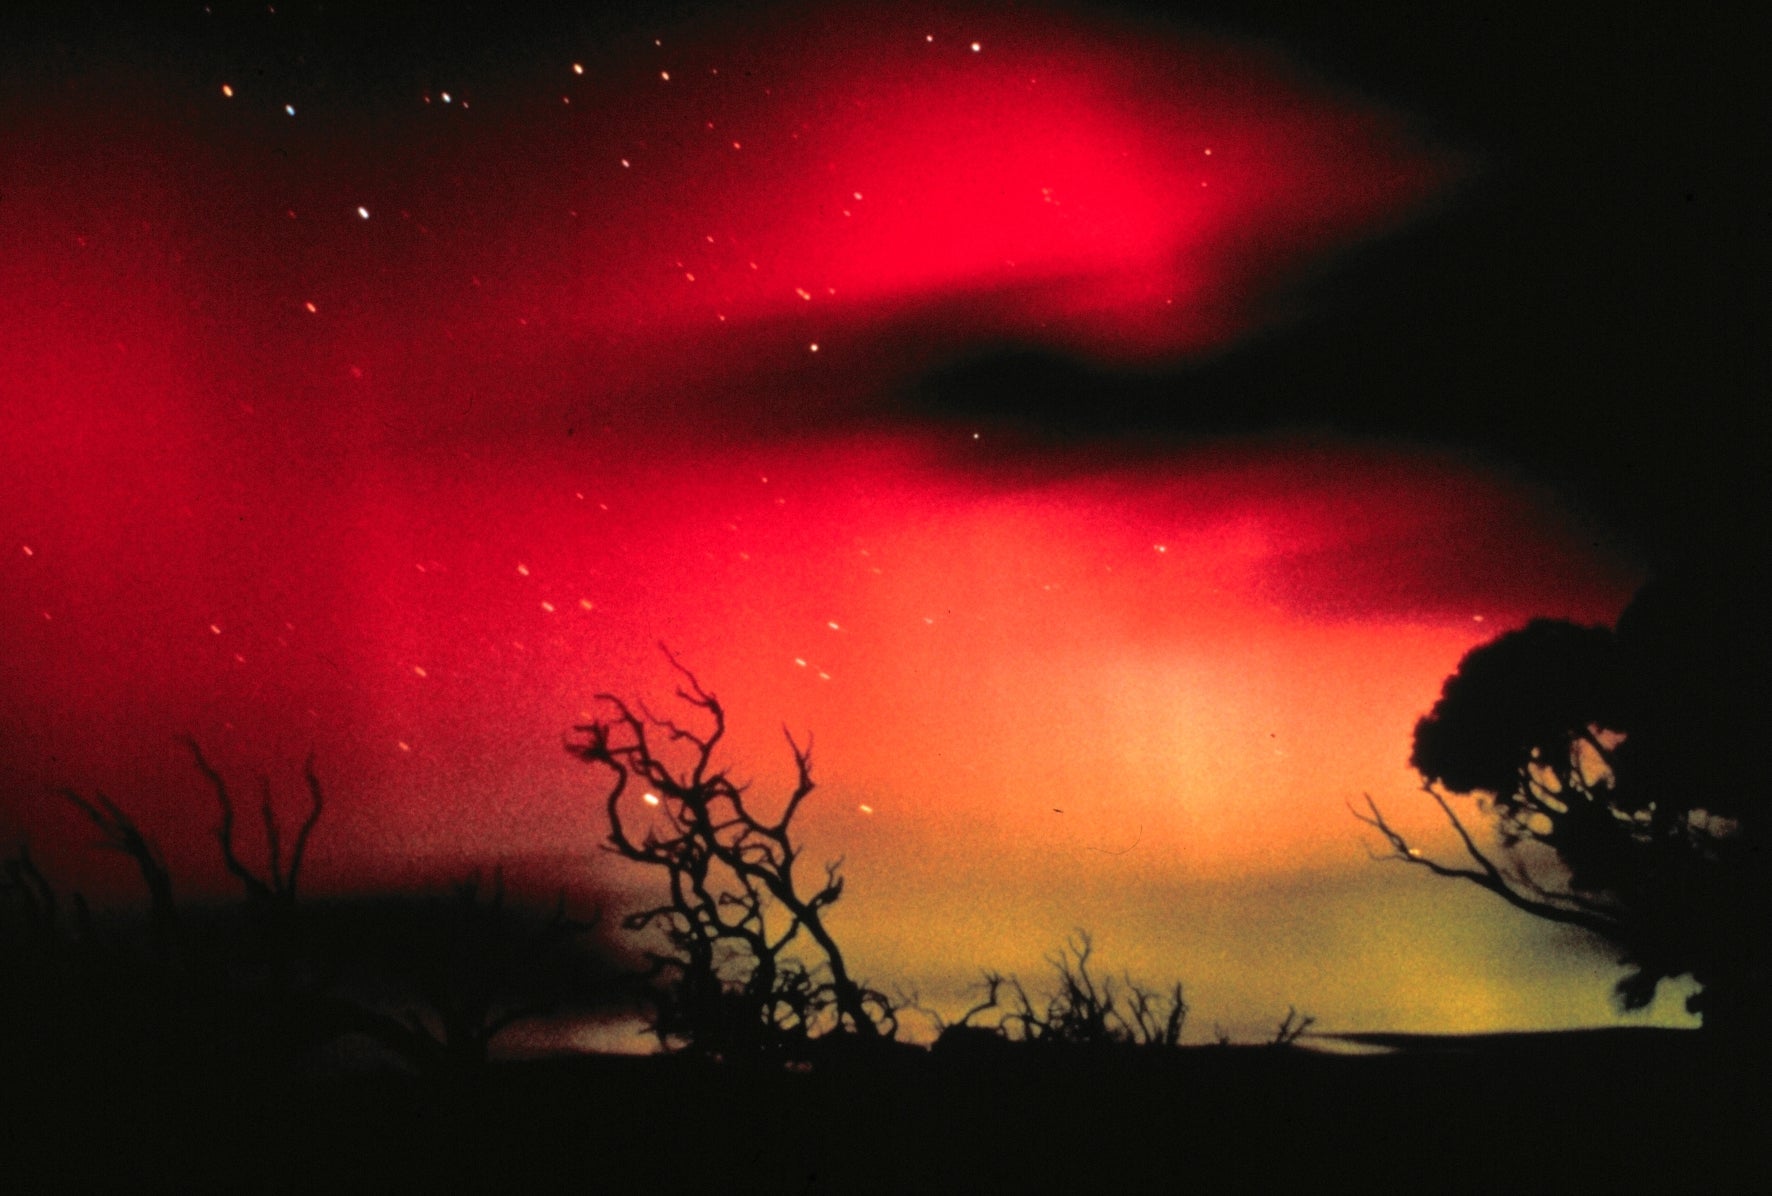 Aurora Australis, the Southern Lights as seen from South Australia